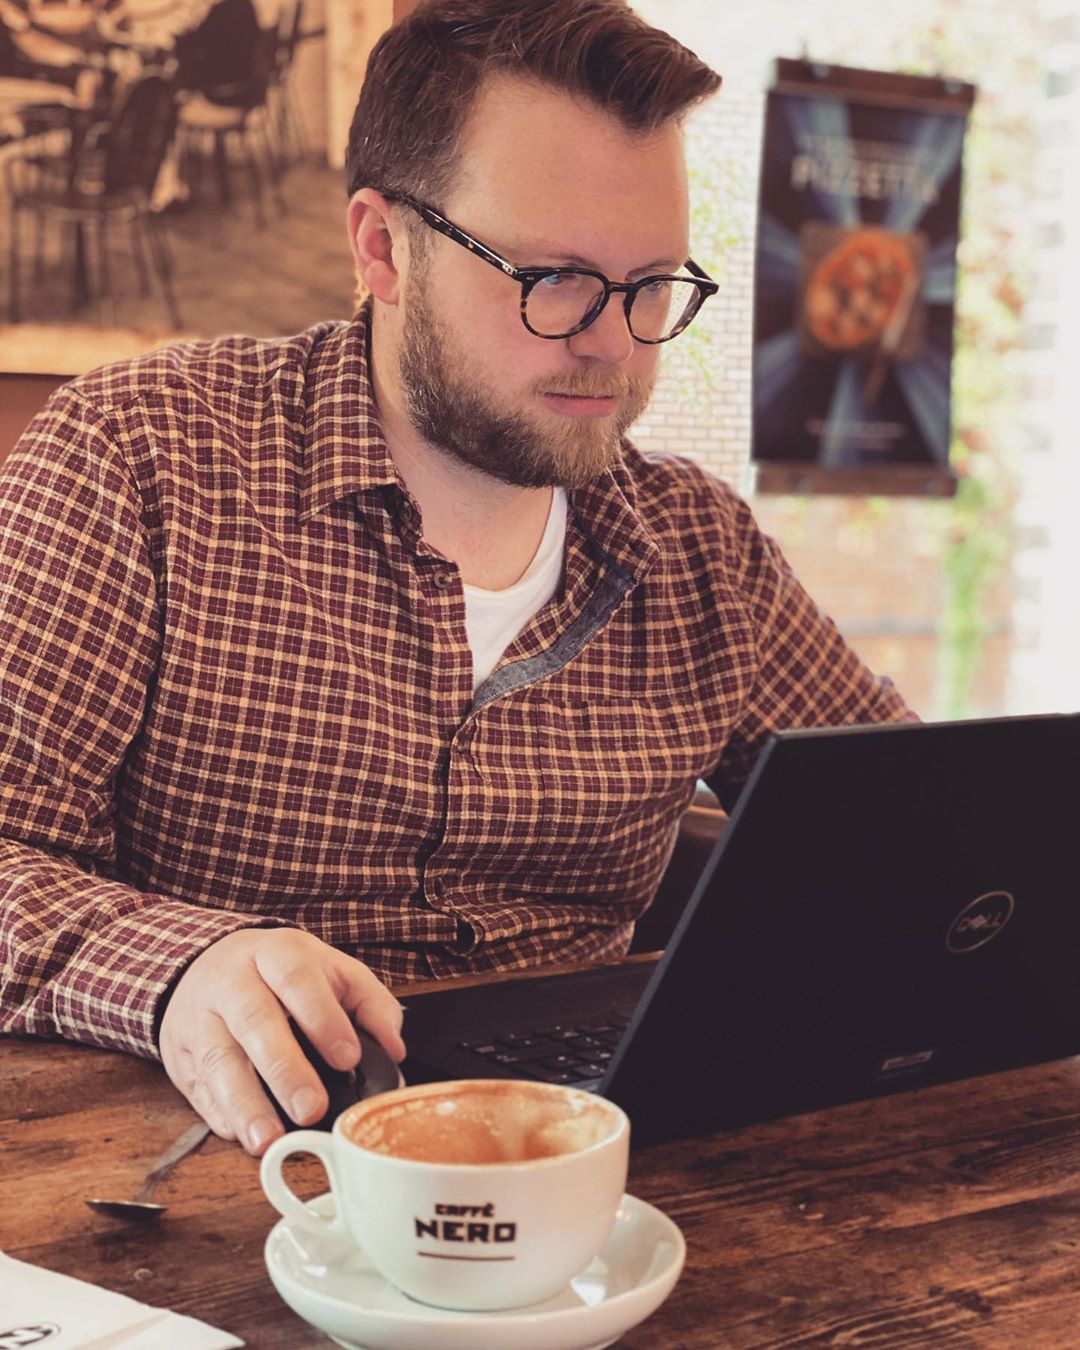 Guy sitting at coffee shop with computer. Photo by Instagram user @shauny2270